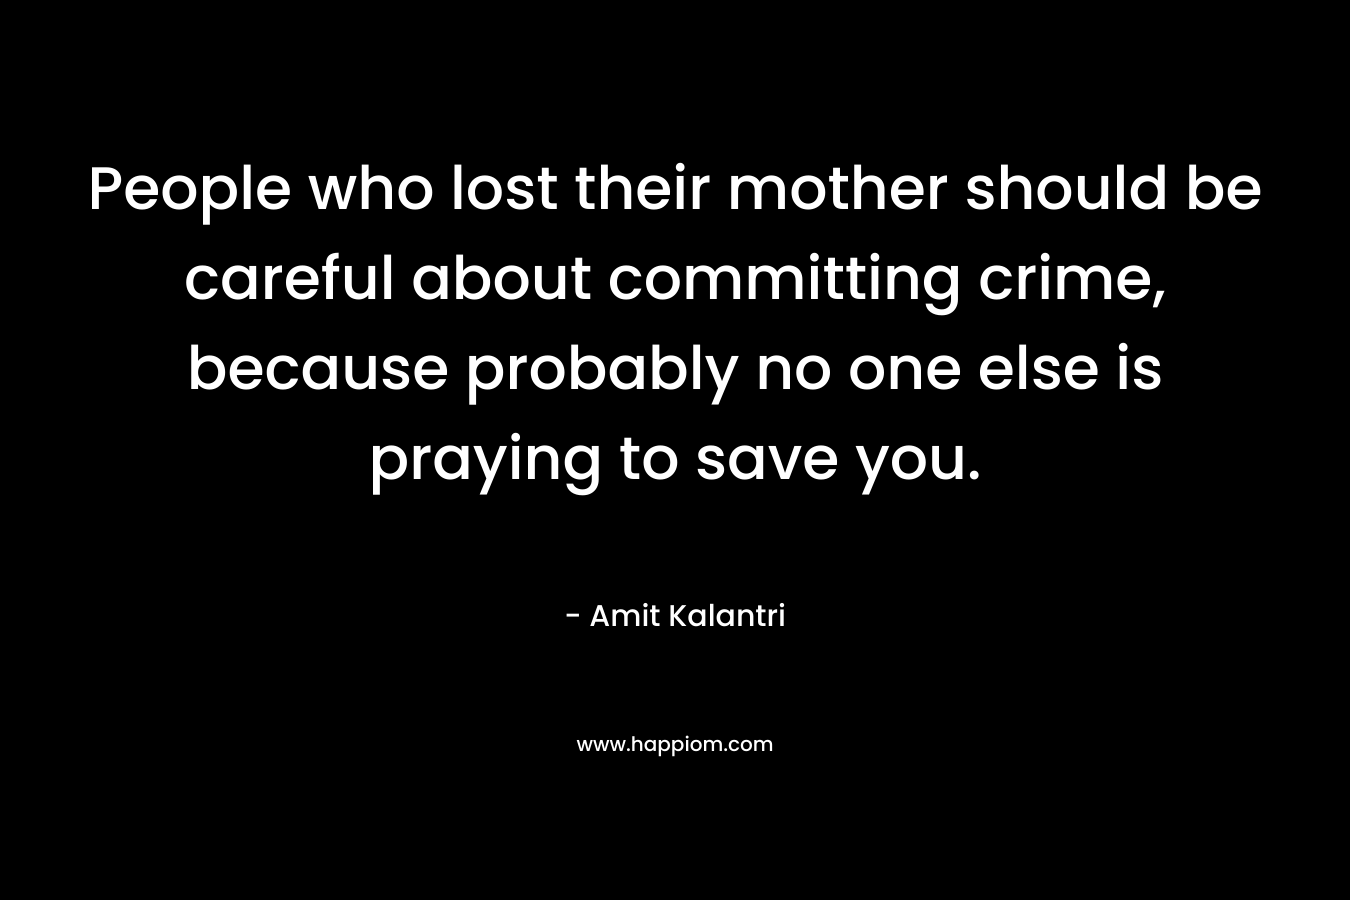 People who lost their mother should be careful about committing crime, because probably no one else is praying to save you.